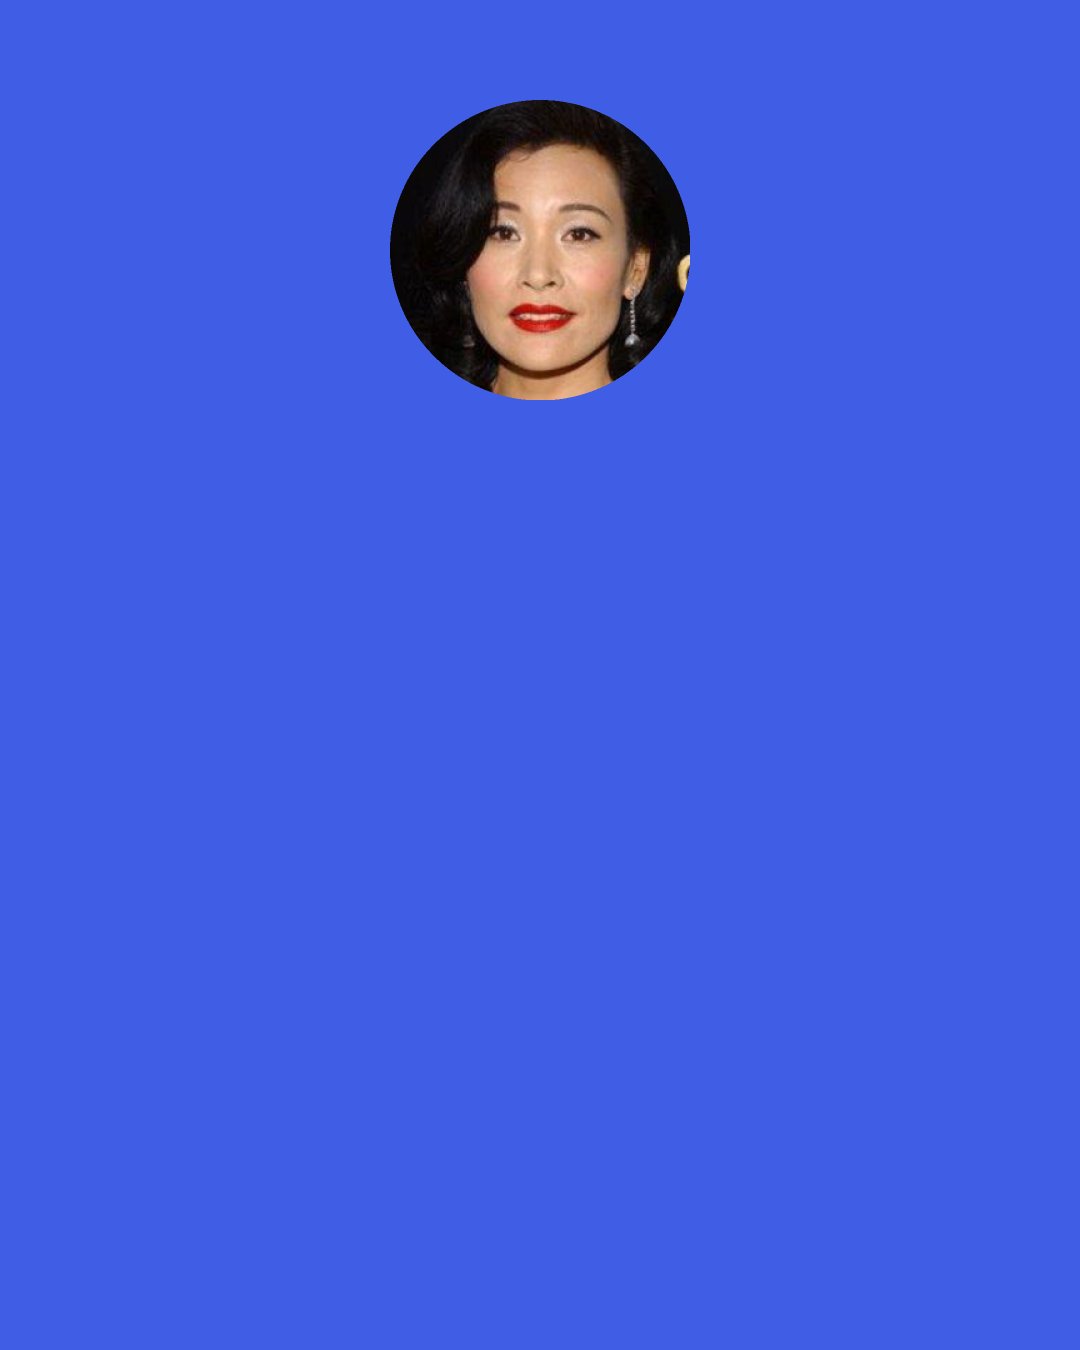 Joan Chen: I remember watching Swan Lake and everybody looking exactly the same, but being able to relate because they were the only company I had ever seen even on video that had Asian dancers. The Asian community in Hawaii is actually almost as dominant as the Caucasian community. I thought "I can relate to that company because they look like people that I see every day." They weren't all little stick-thin Russian ballerinas.